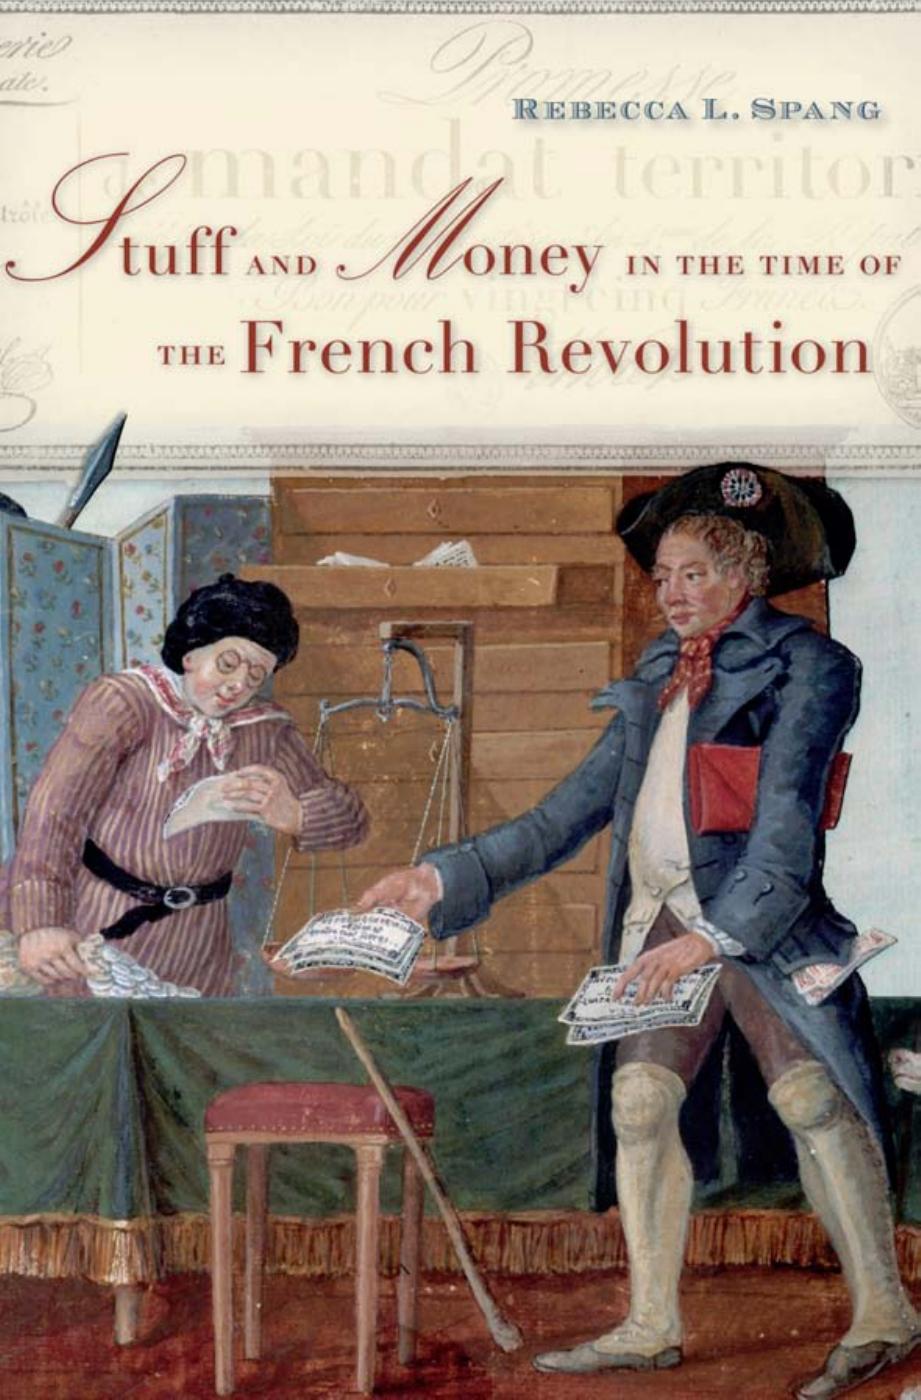 Stuff and Money in the Time of the French Revolution by Rebecca L. Spang